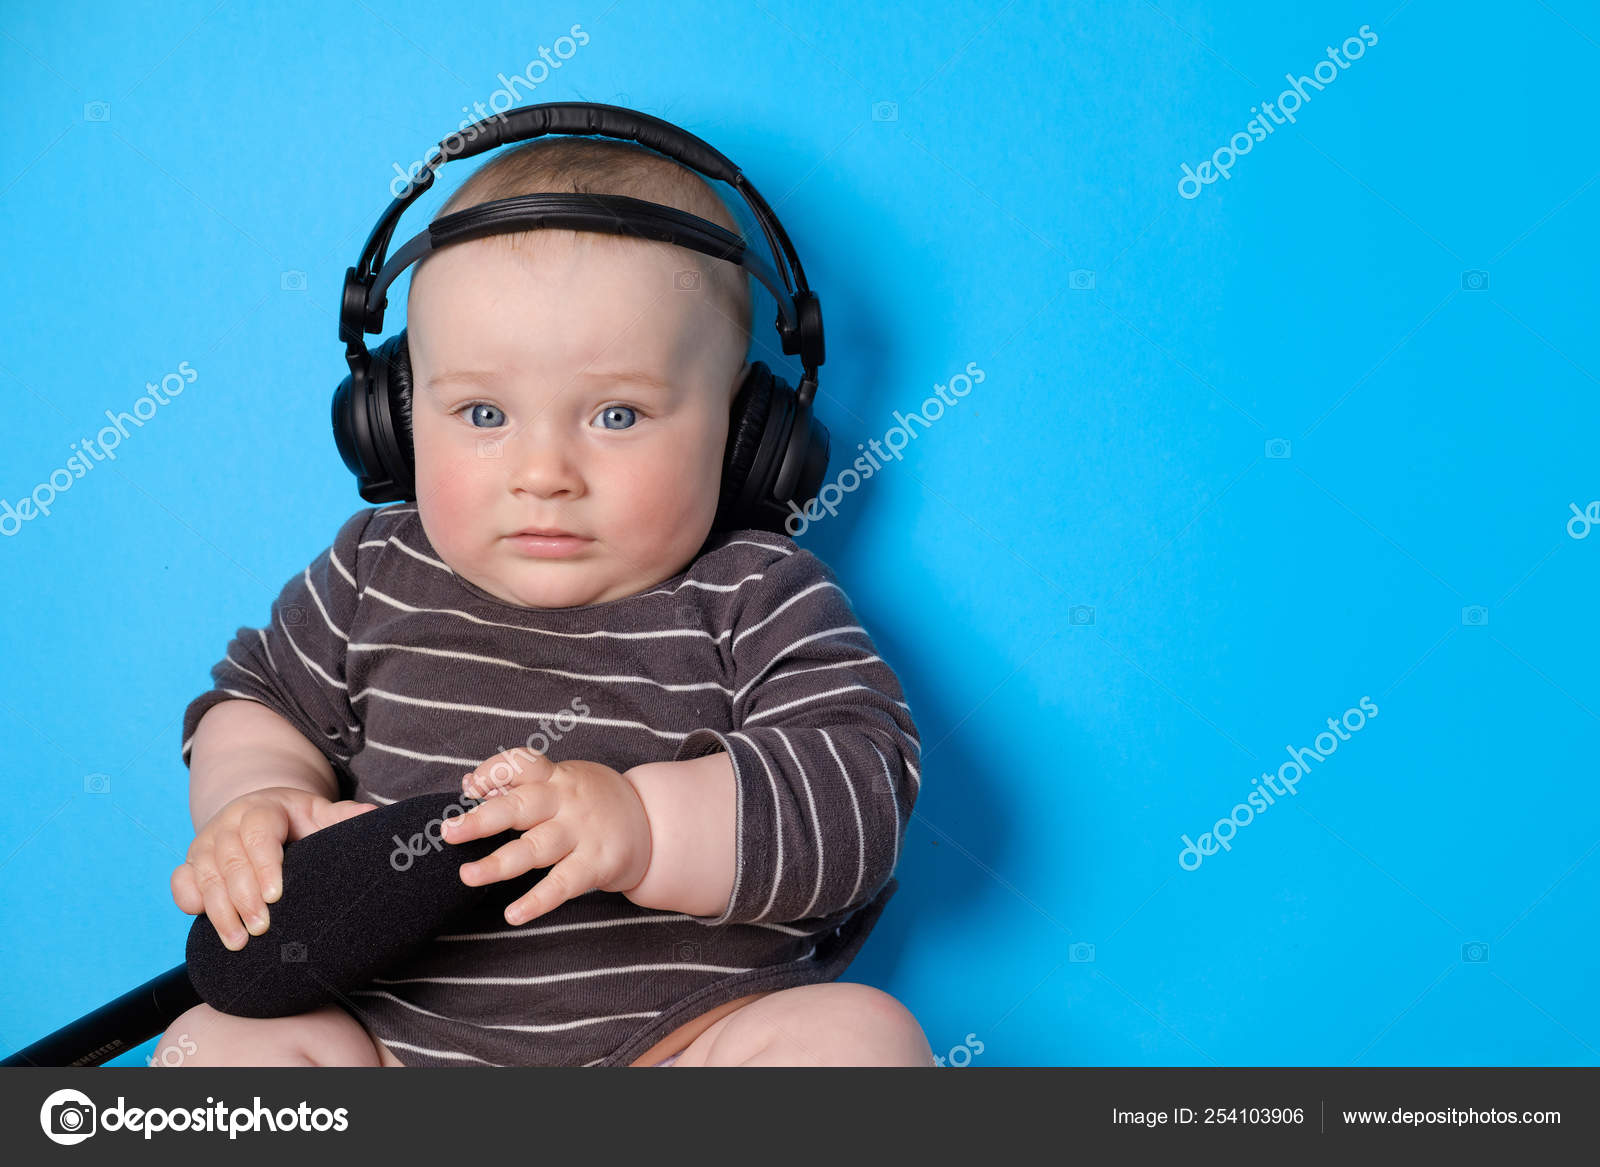 Podcast background Stock Photos, Royalty Free Podcast background Images |  Depositphotos